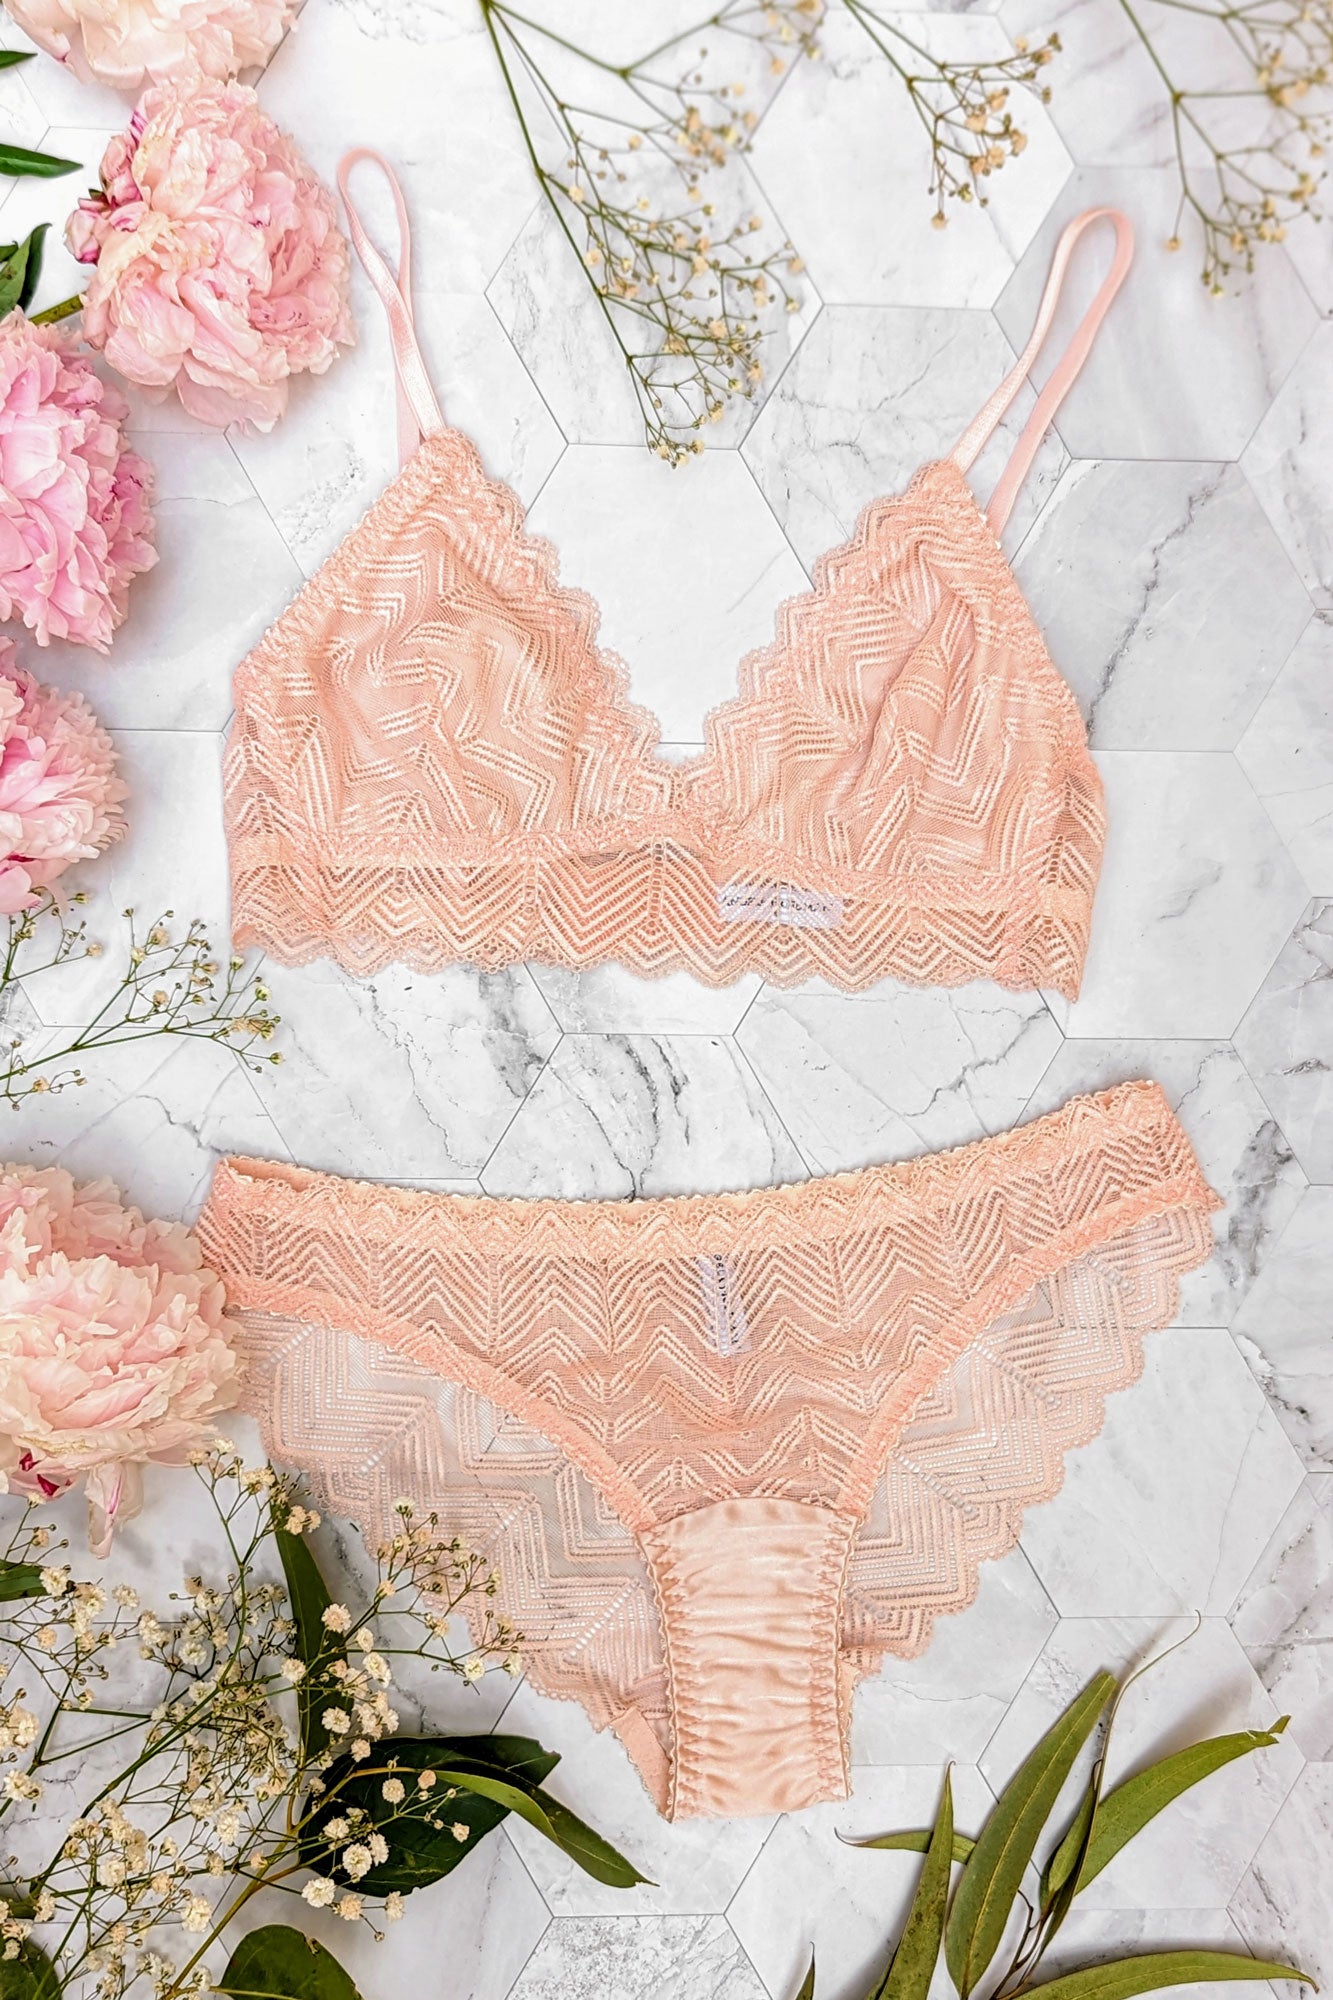 Angelina Matching Bra and Panties Set with Flower Lace Design –